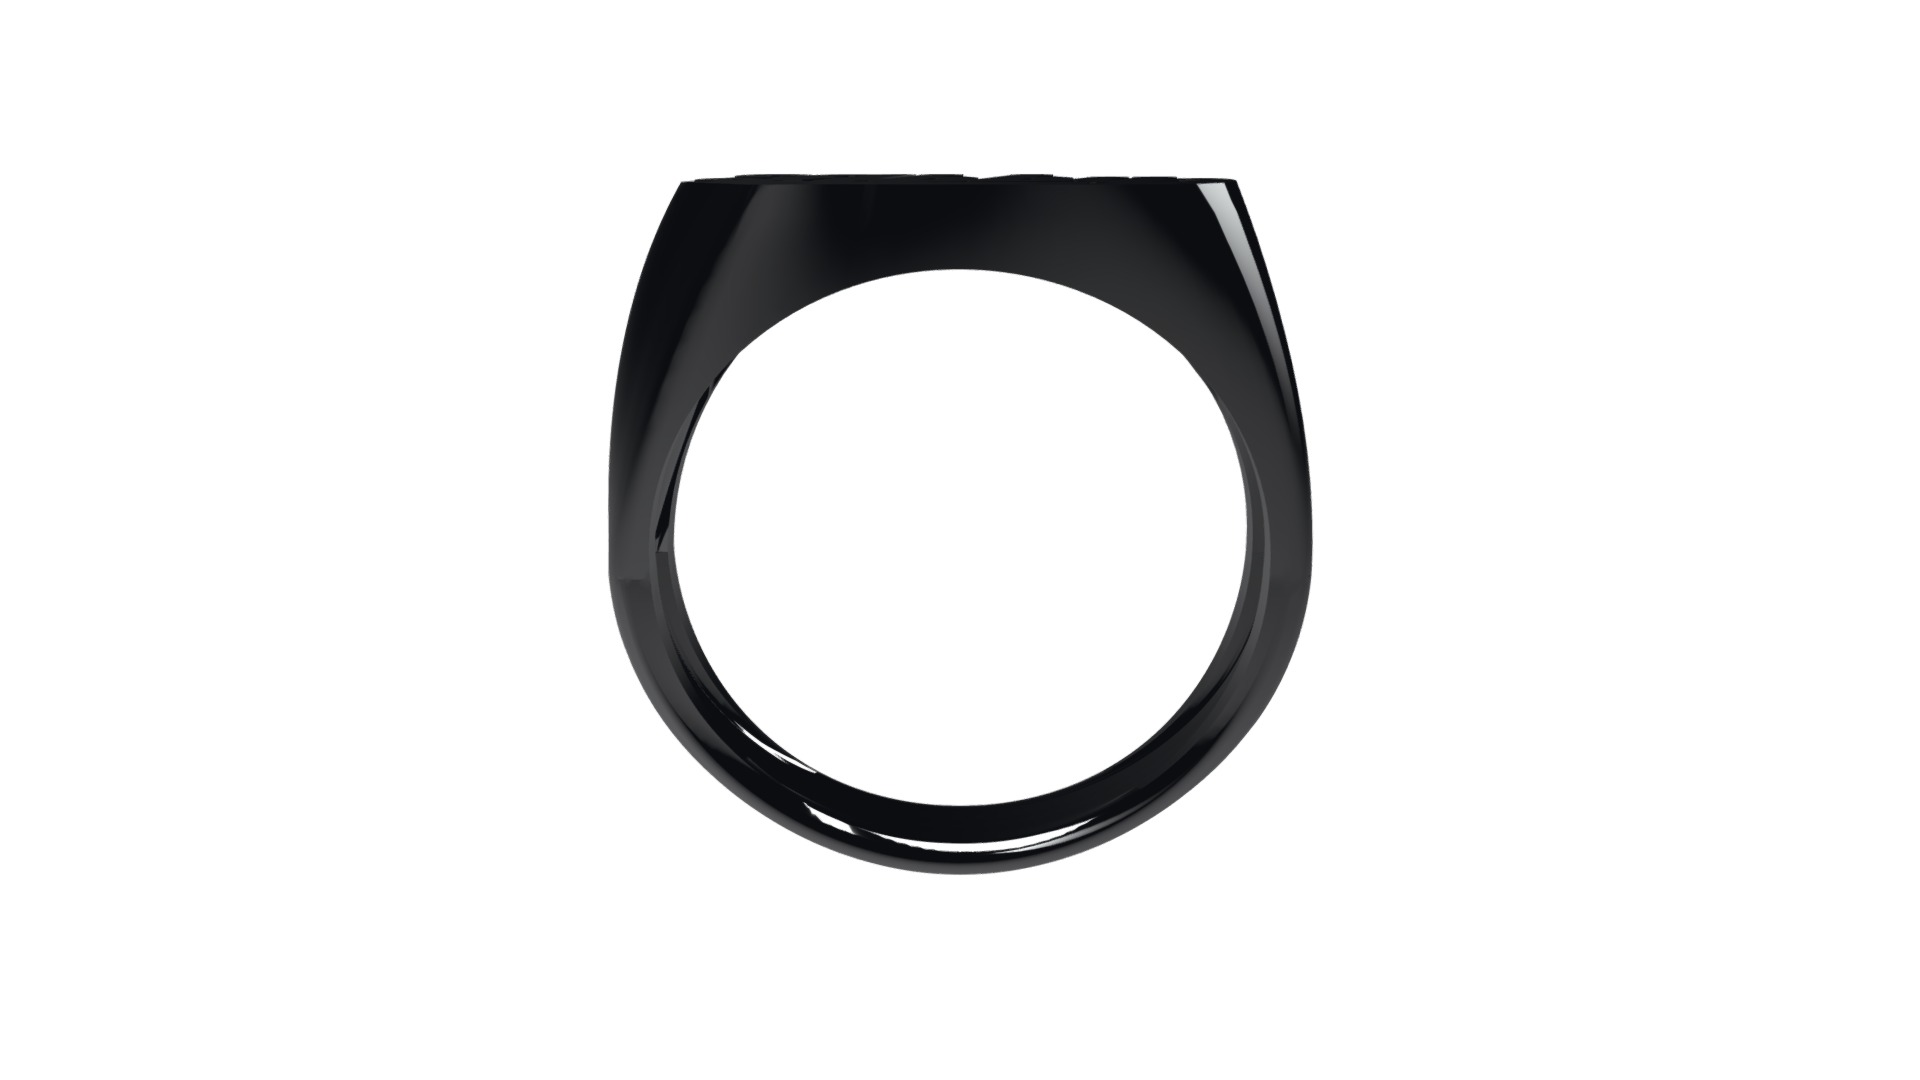 3D model 6mm Name Ring-Abby-6.25 - This is a 3D model of the 6mm Name Ring-Abby-6.25. The 3D model is about a black circle with a white background.